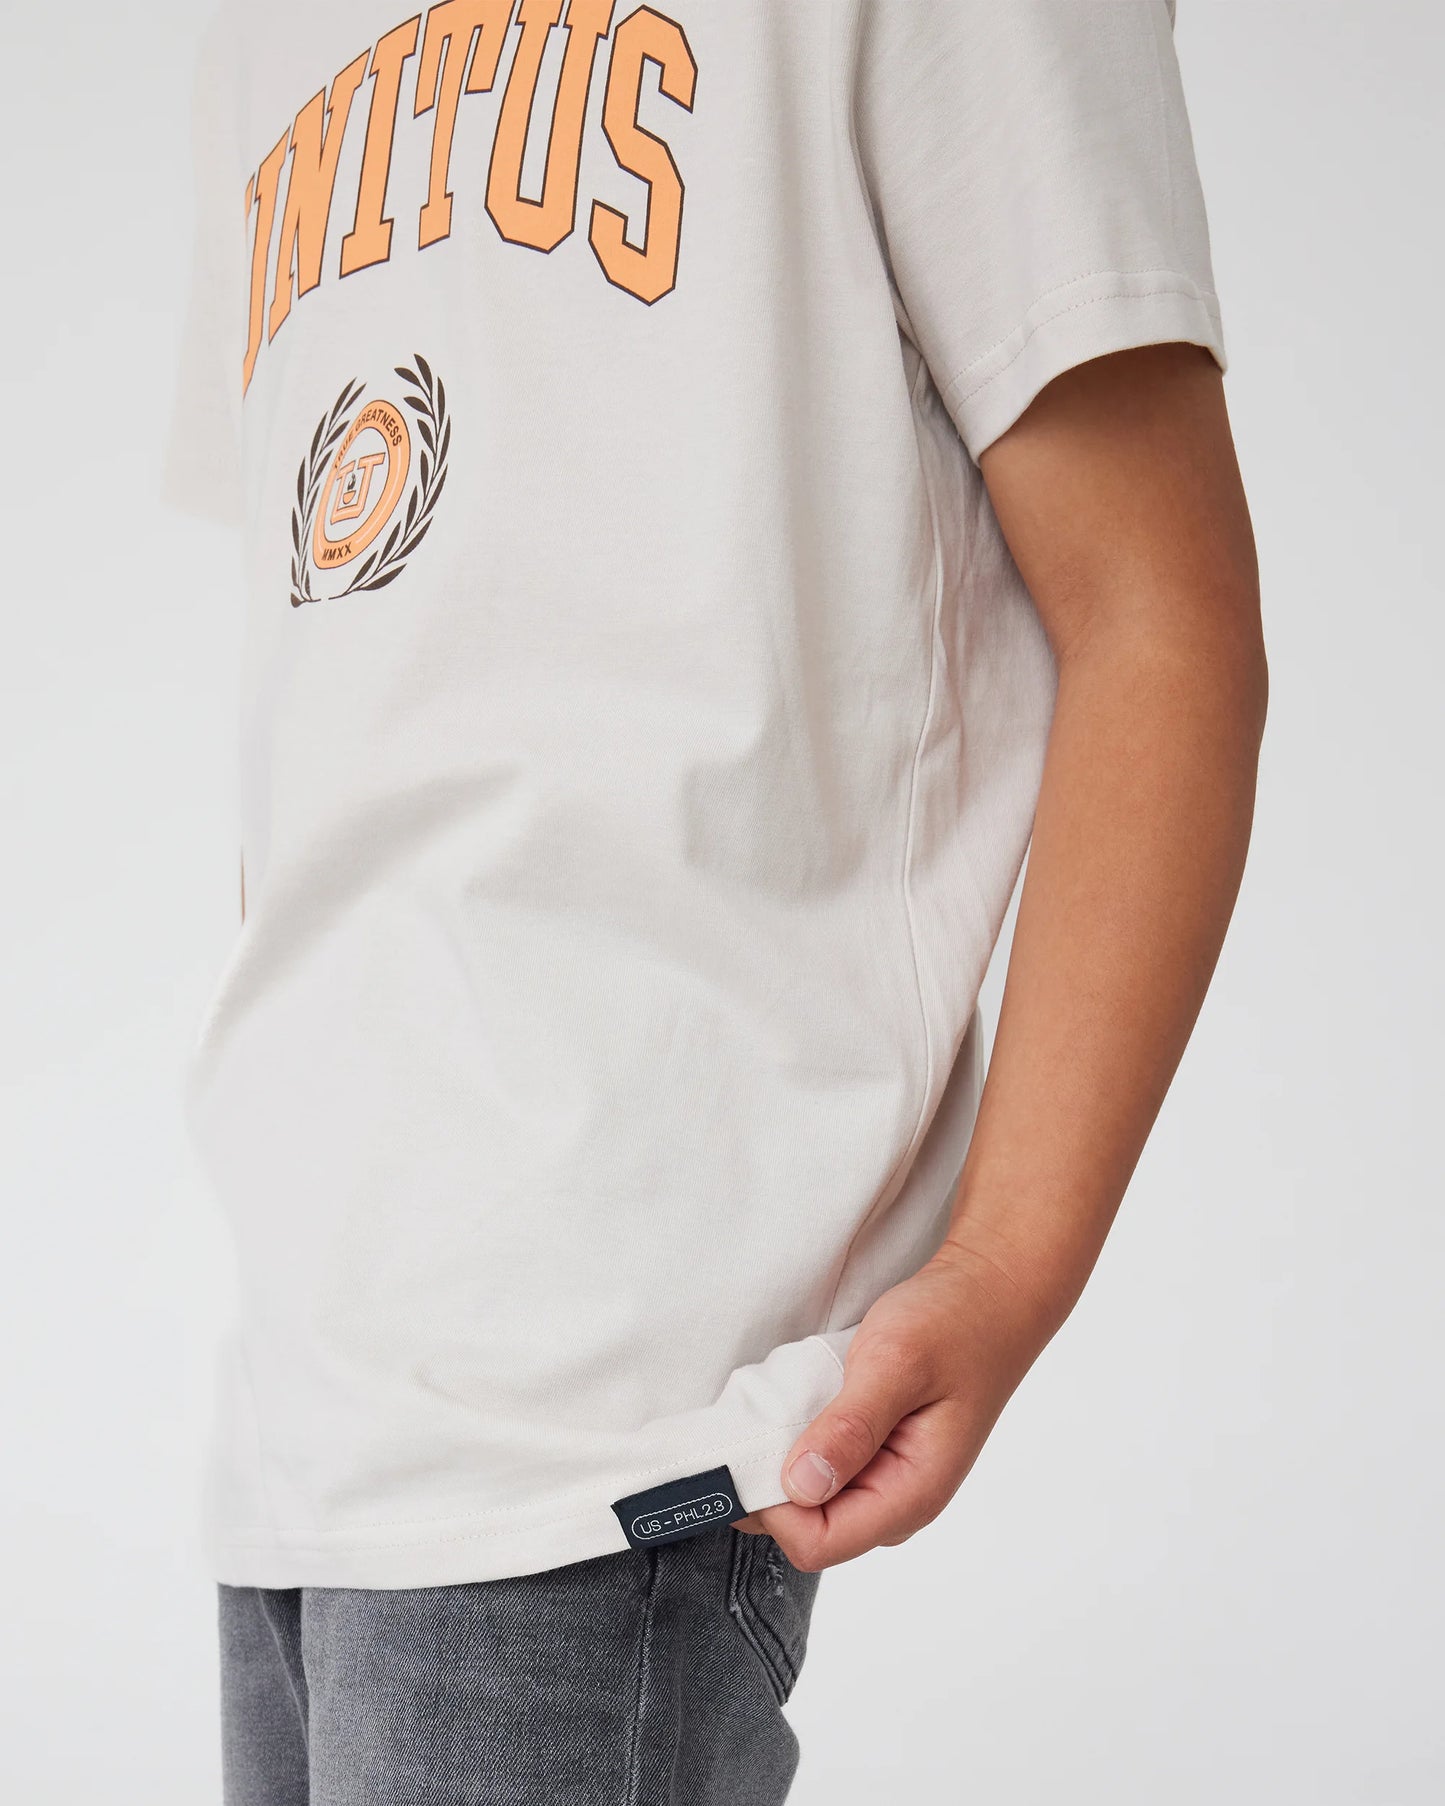 Youth Collegiate Tee